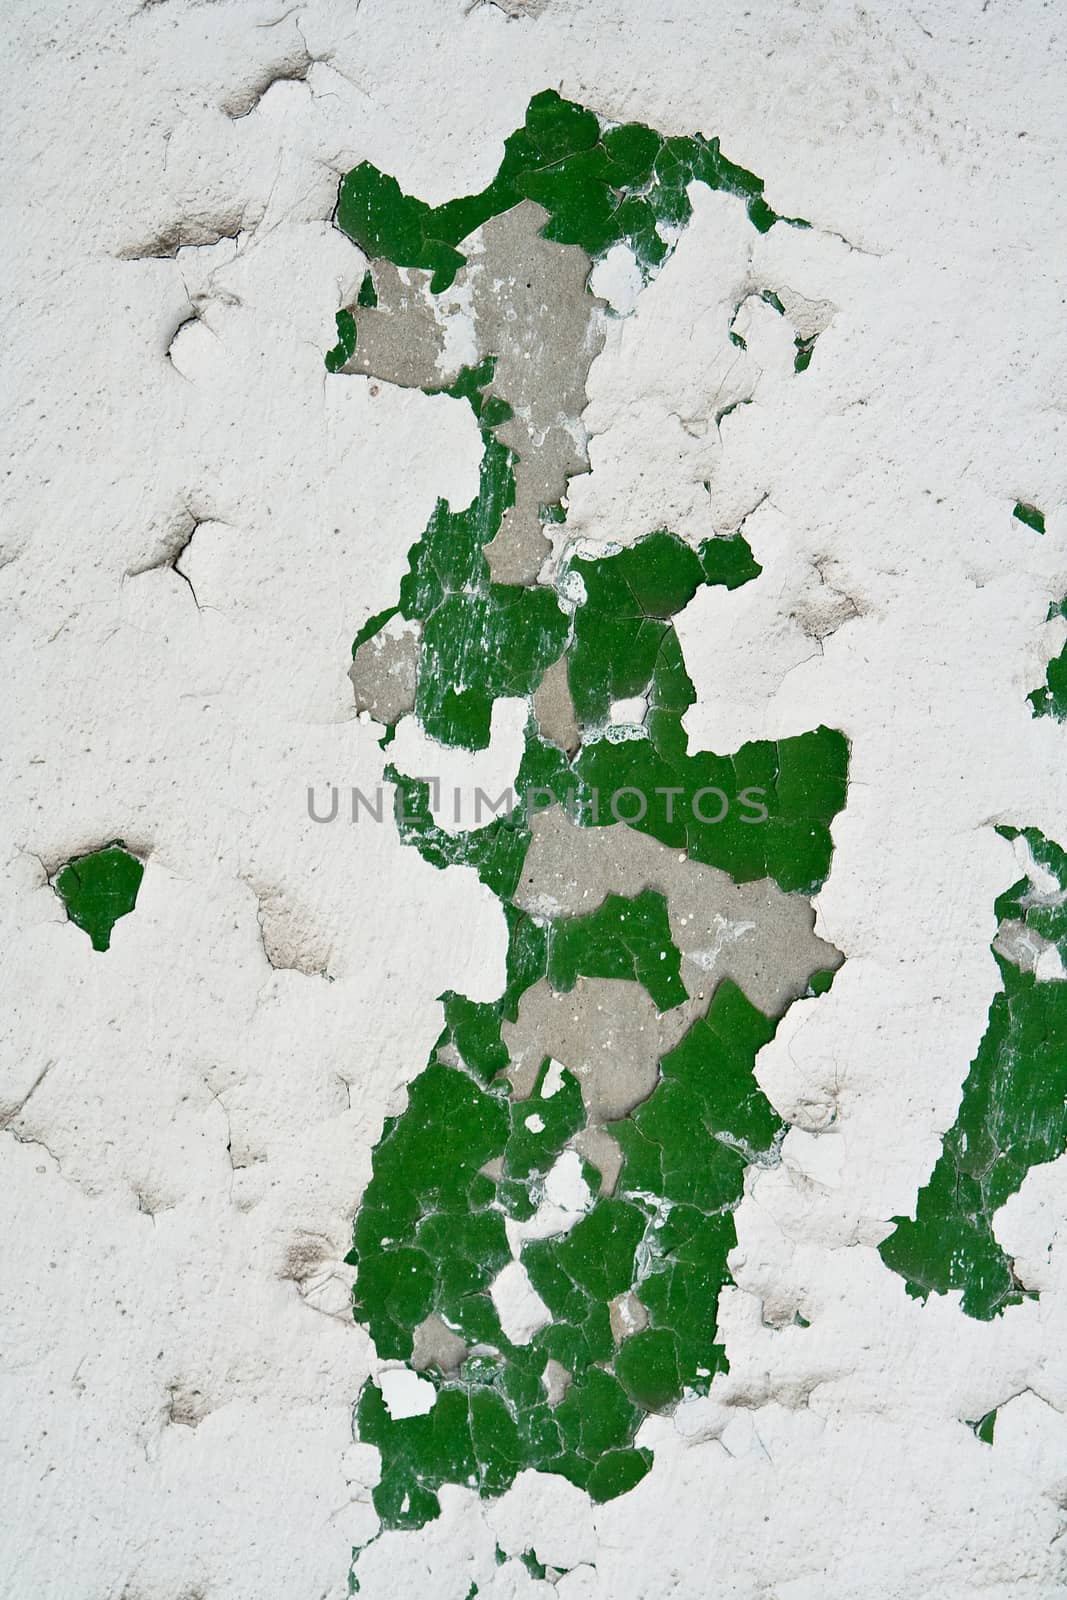 Weathered damaged old painted wall by mrakor